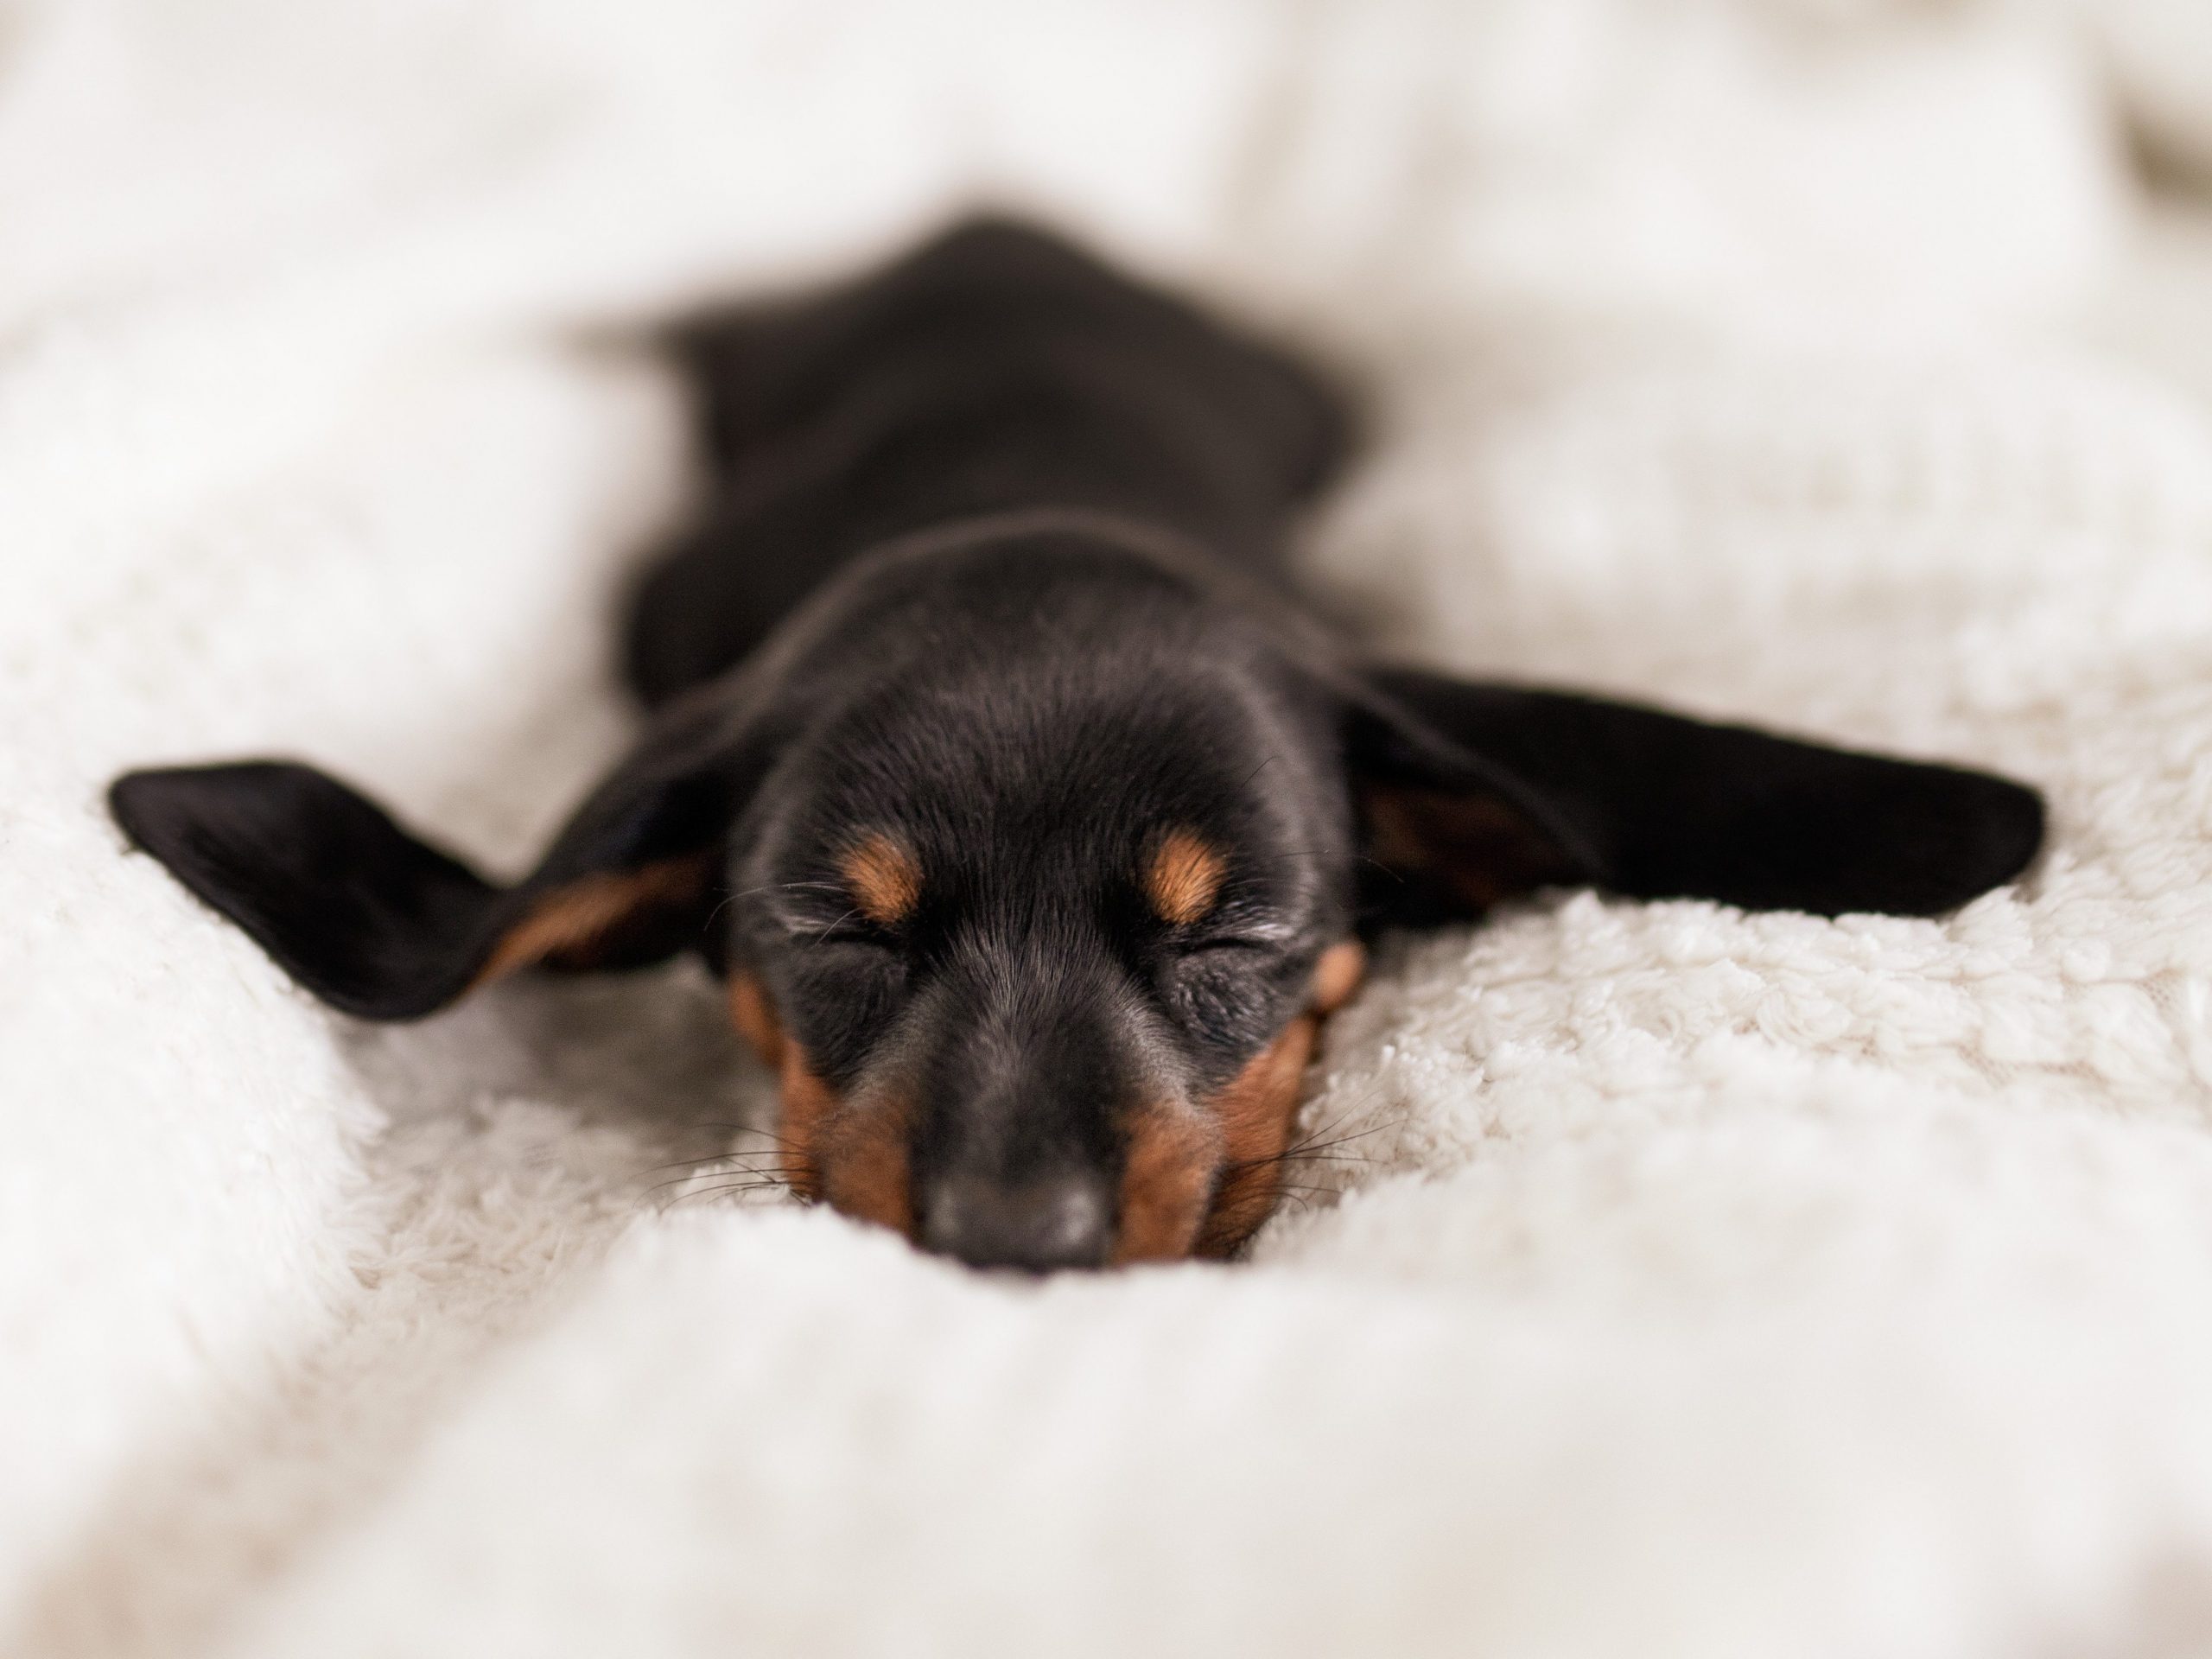 Bringing Home a New Puppy | Tips for the First Few Nights